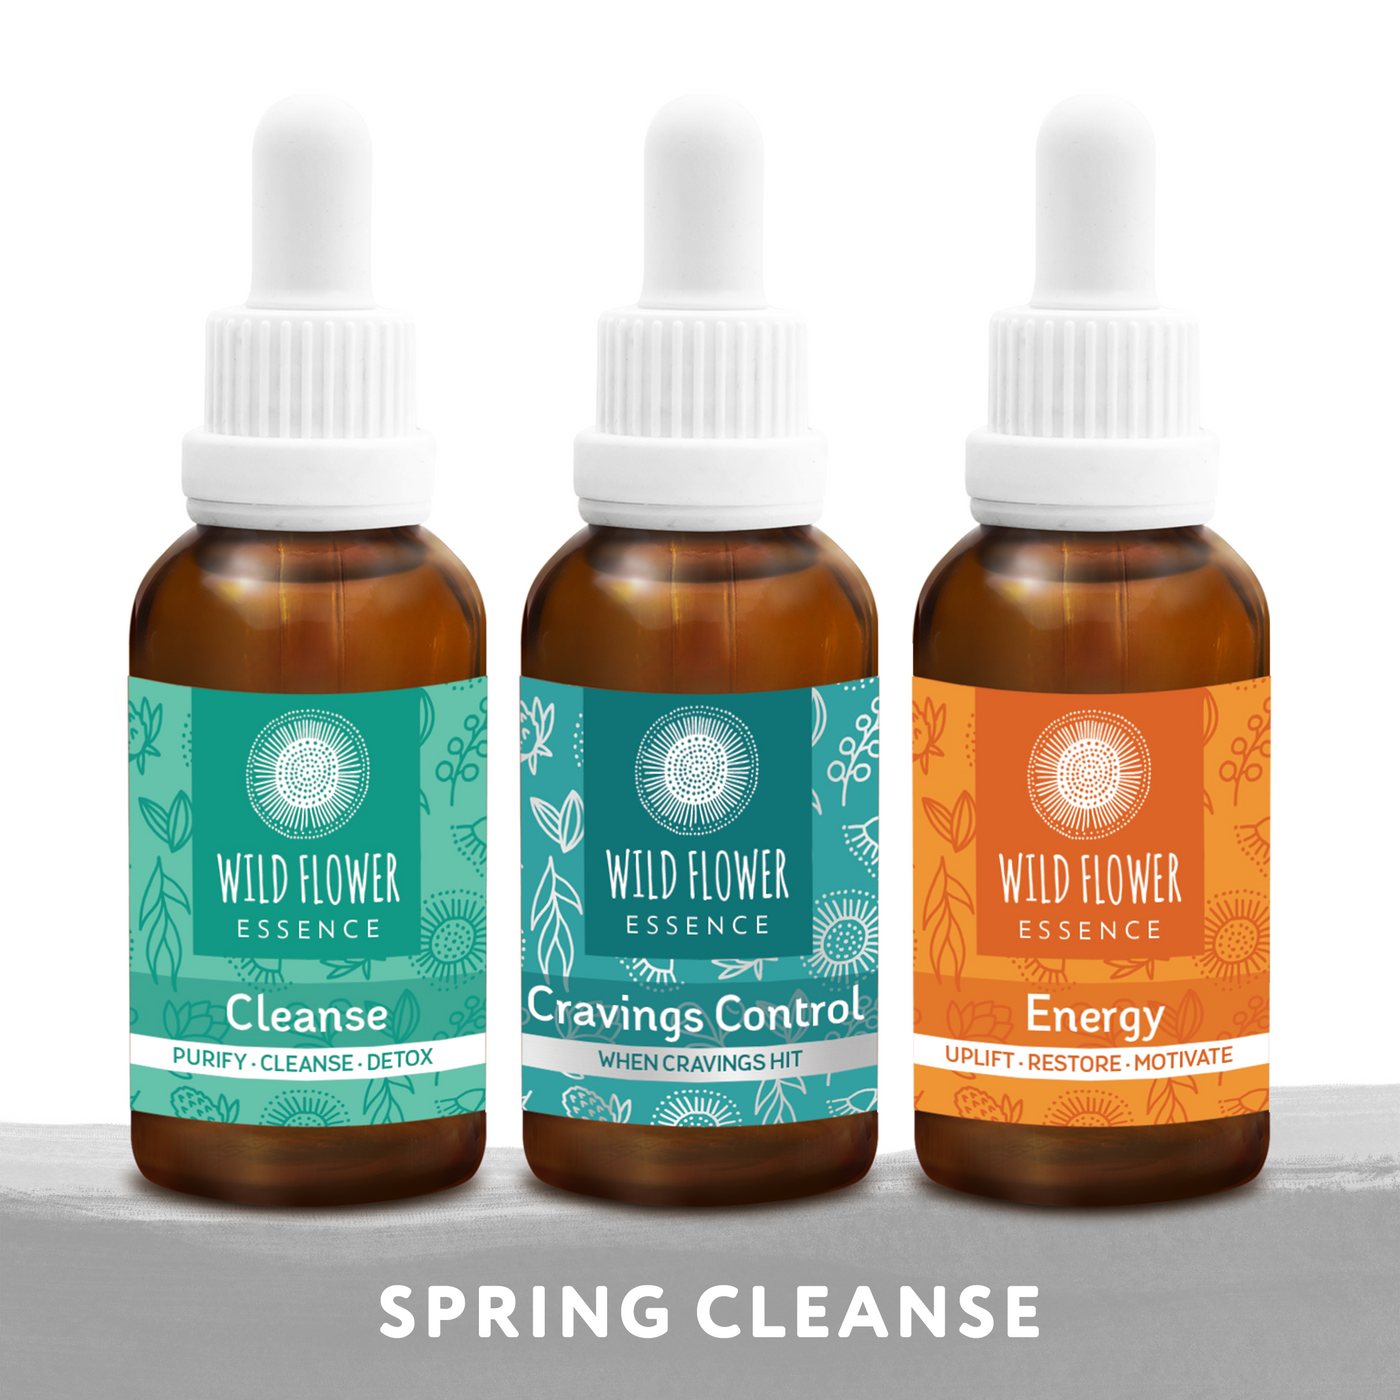 Spring Cleanse Pack